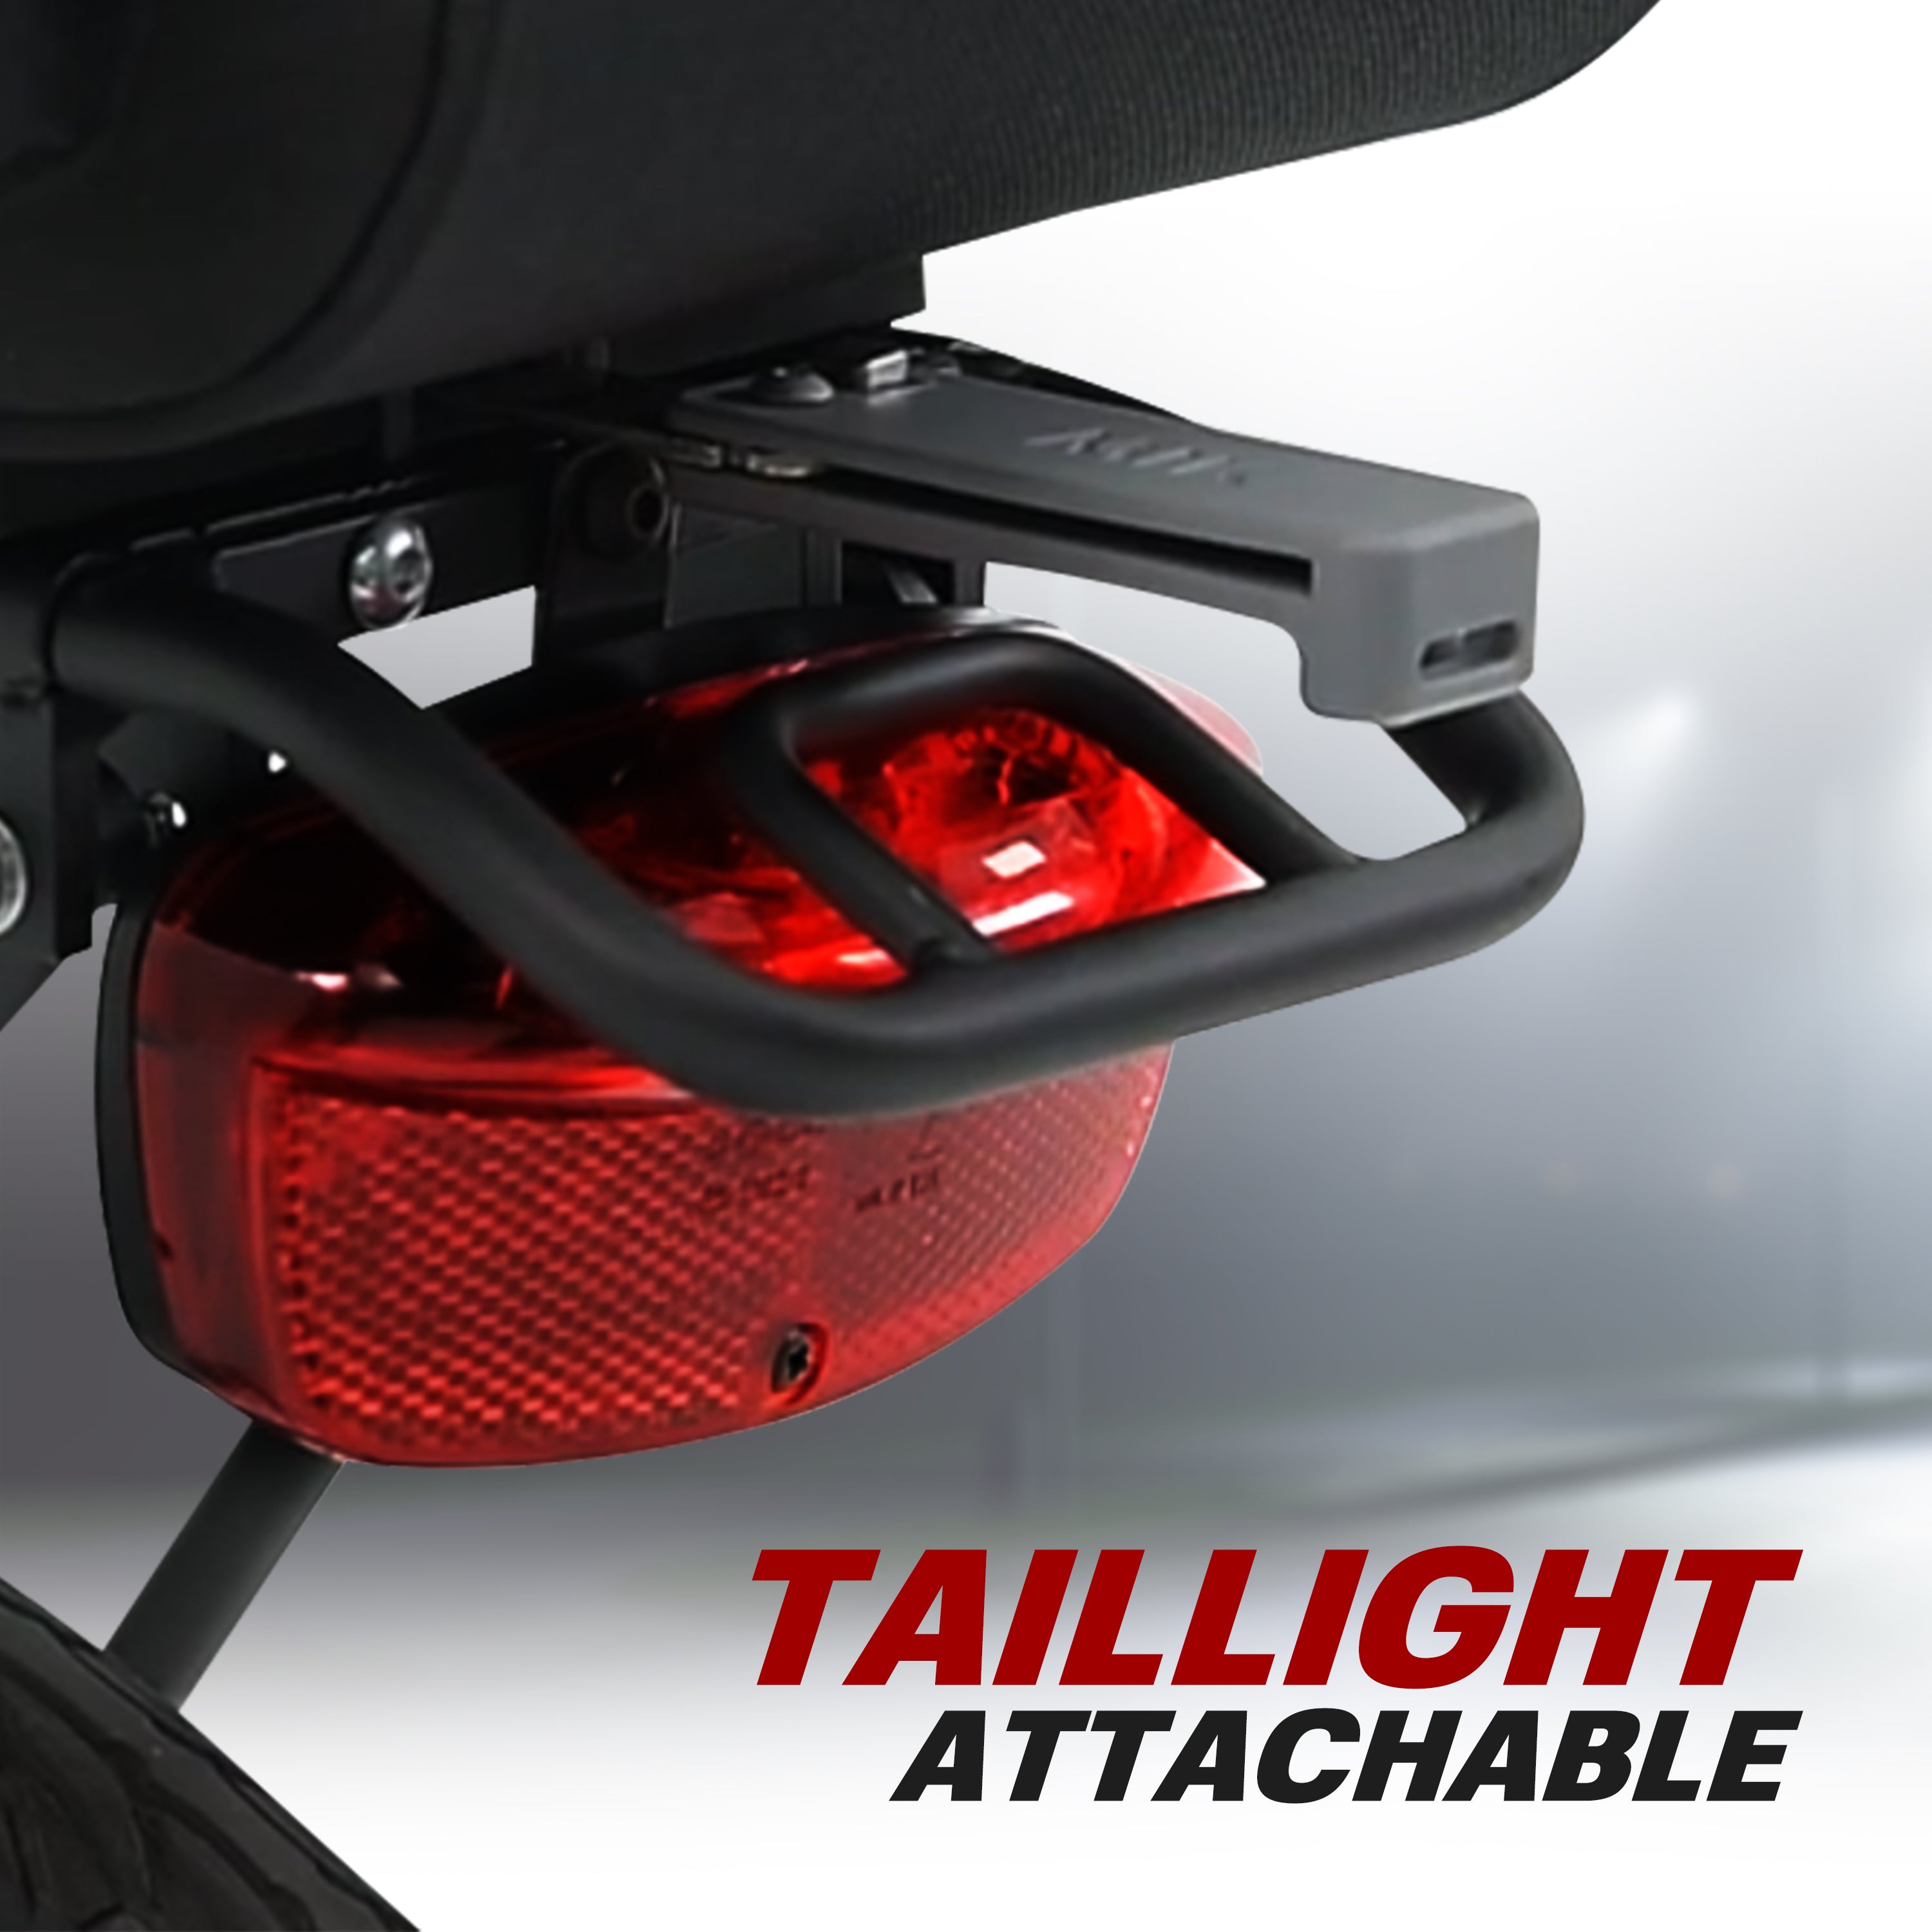 Taillight Attachable